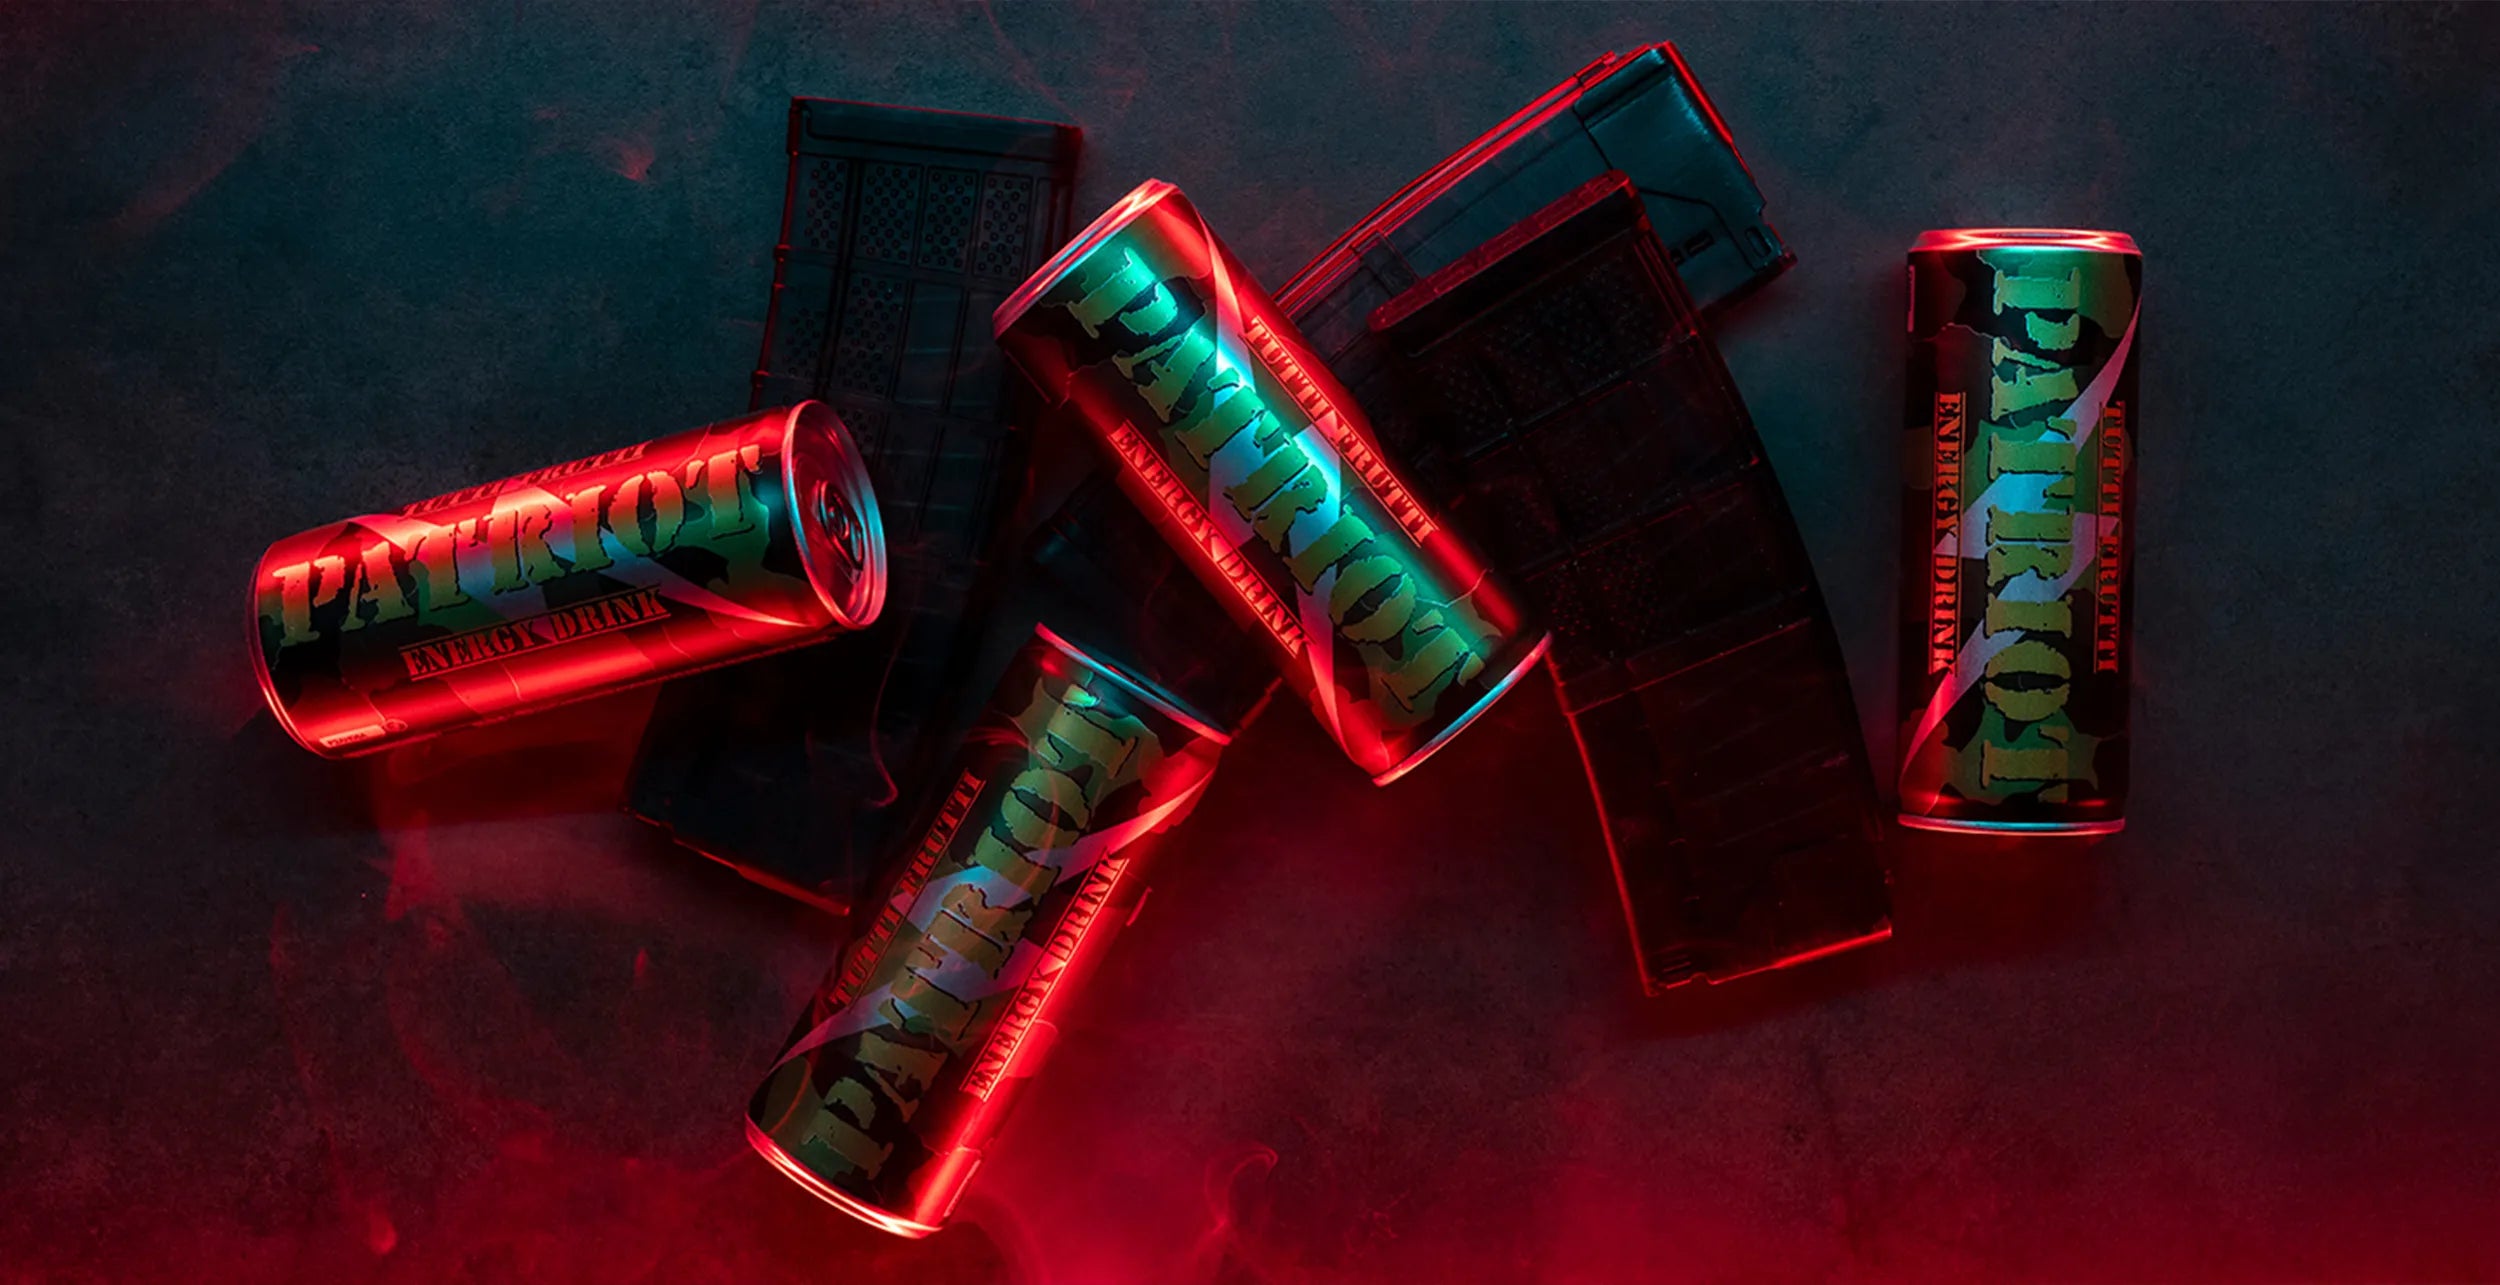 image of 4 cans of Patriot classic energy drinks laying across ammunition magazines